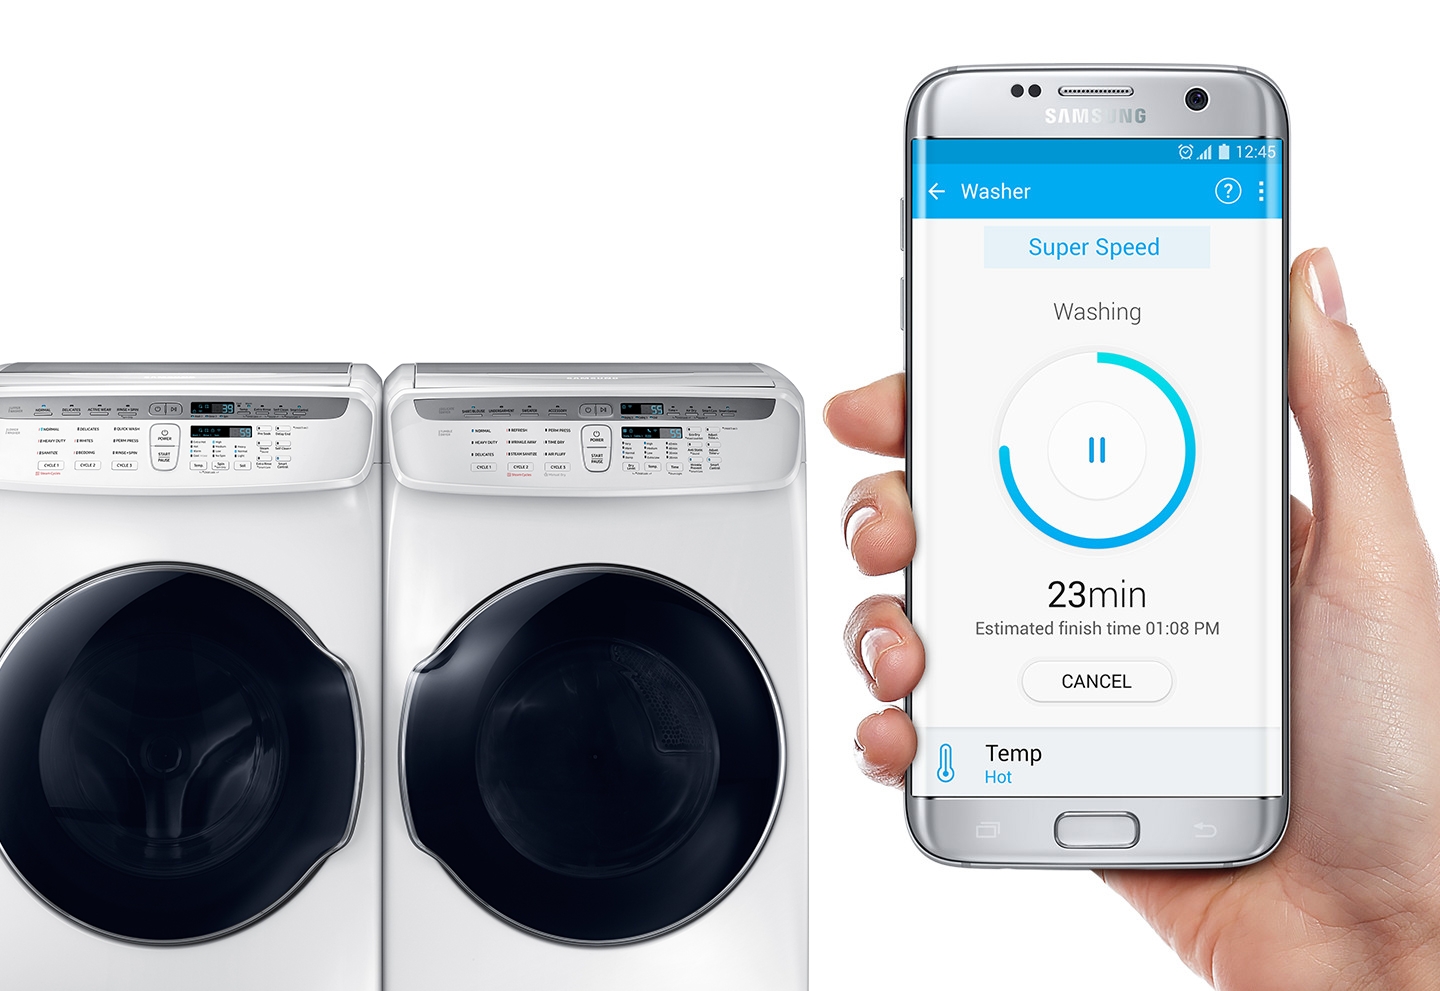 https://image-us.samsung.com/SamsungUS/home/home-appliances/washers/flex-washers/wv55m9600aw/083018/12-Smart-Control_WD9600_W.jpg?$feature-benefit-bottom-mobile-jpg$